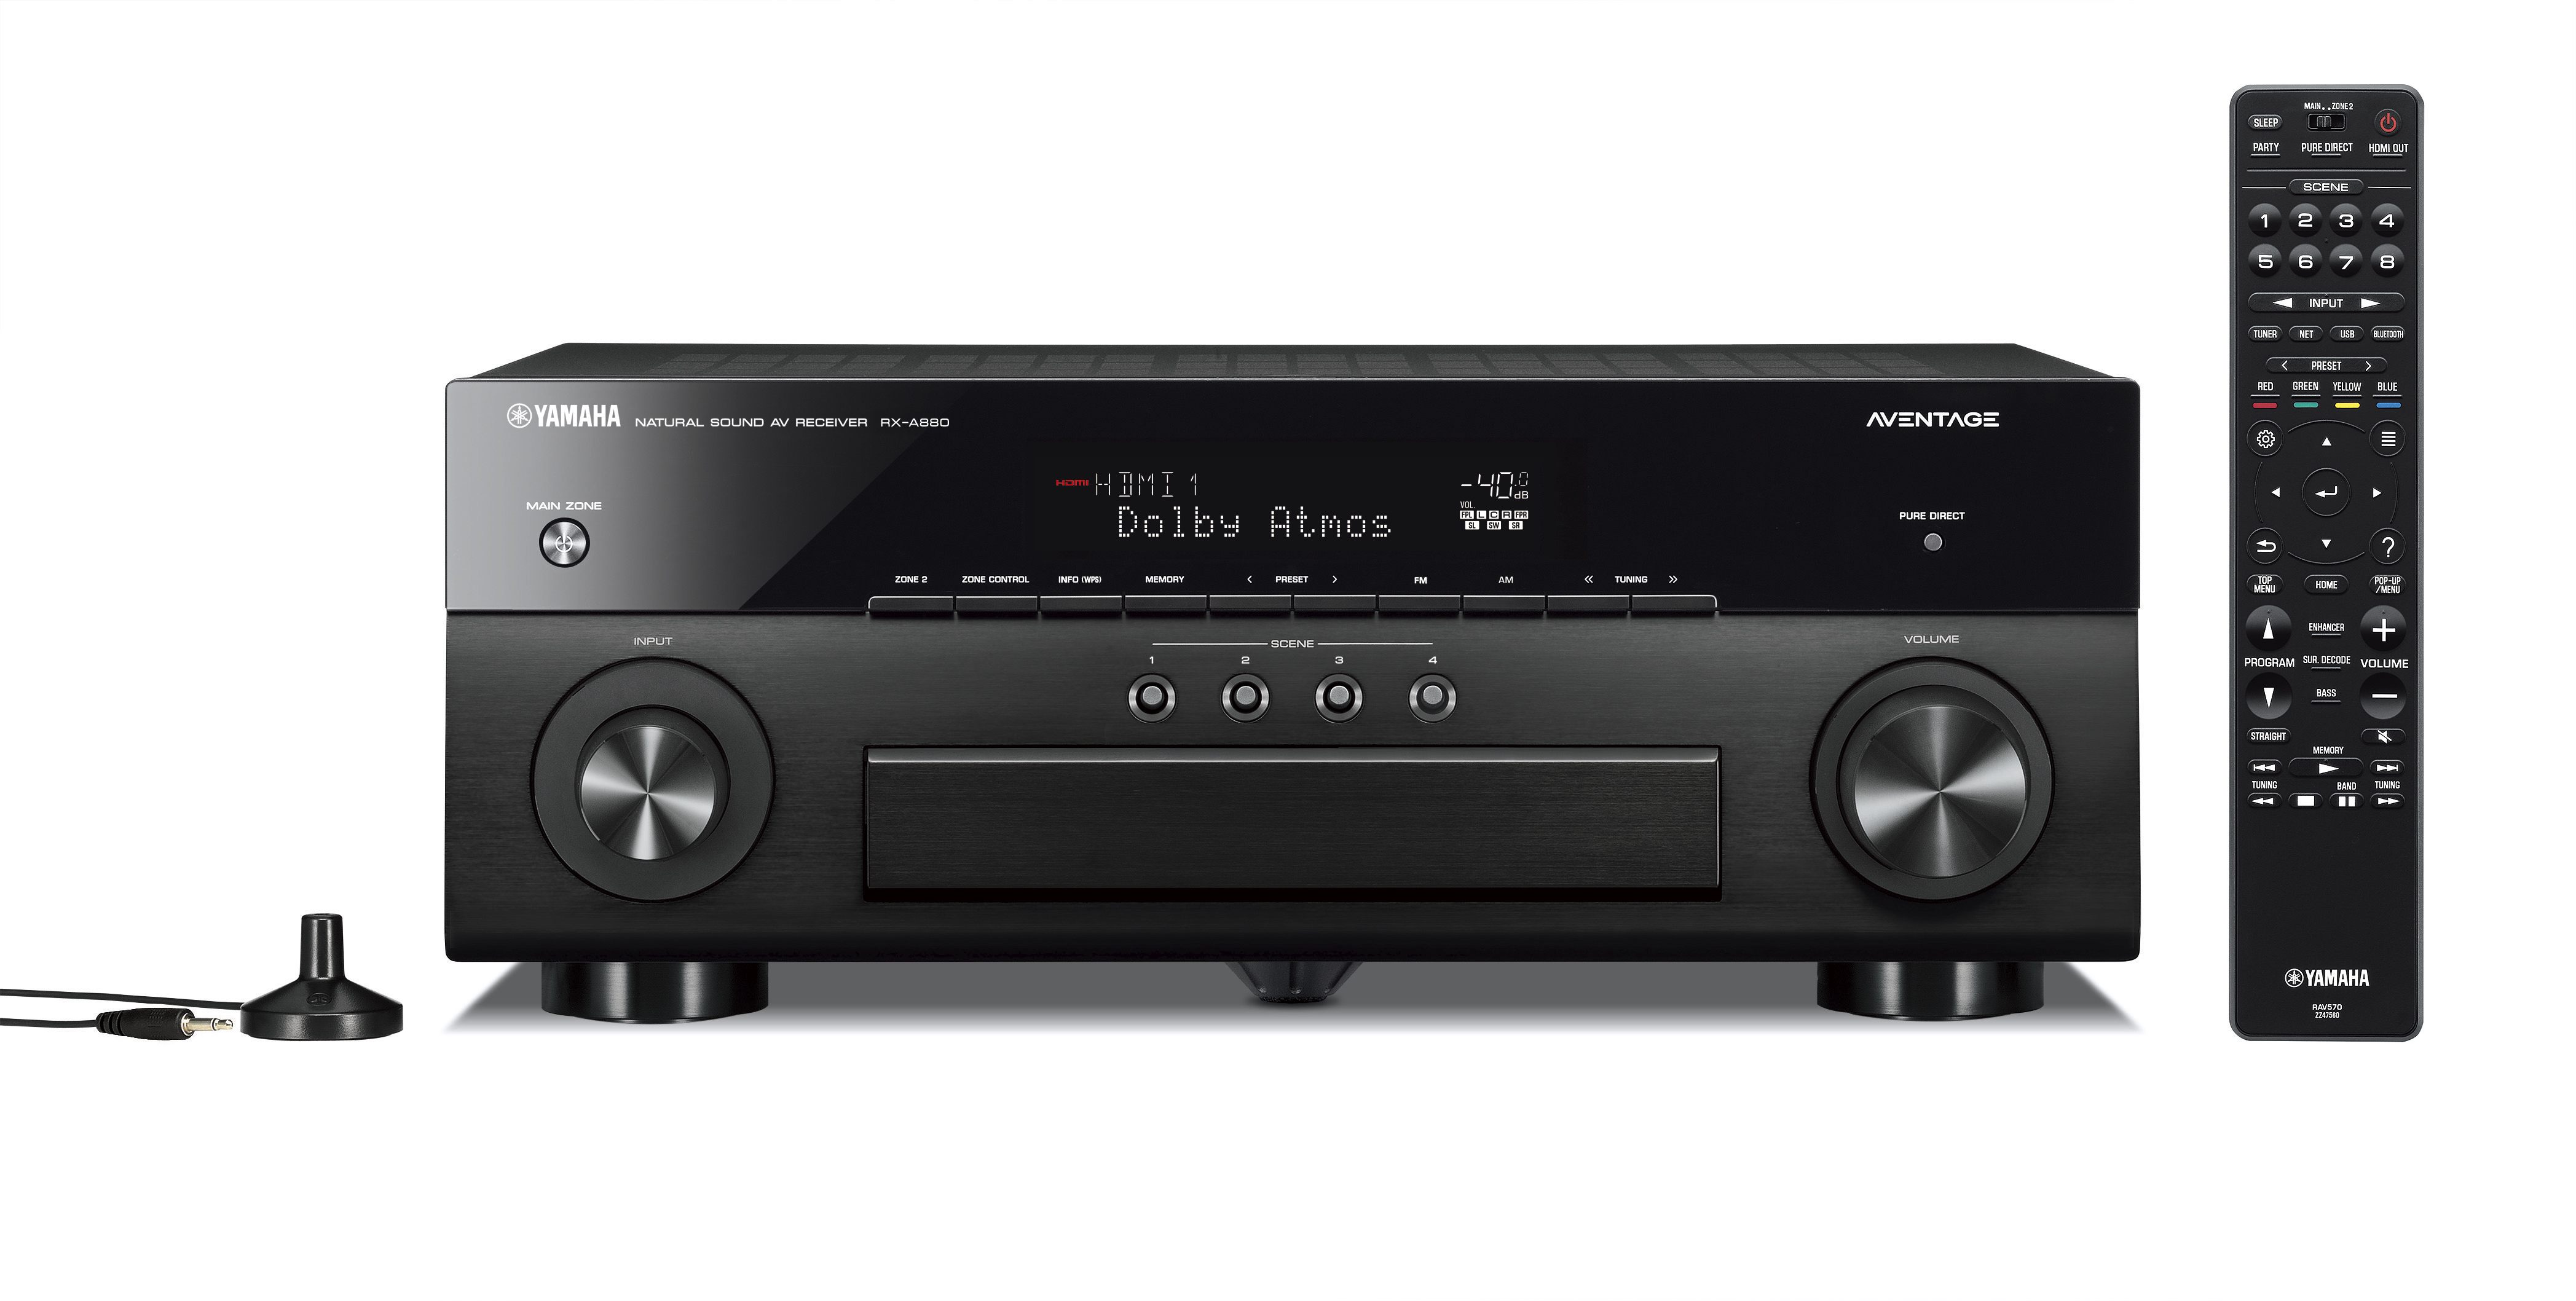 RX-A880 - Overview - AV Receivers - Audio & Visual - Products - Yamaha USA